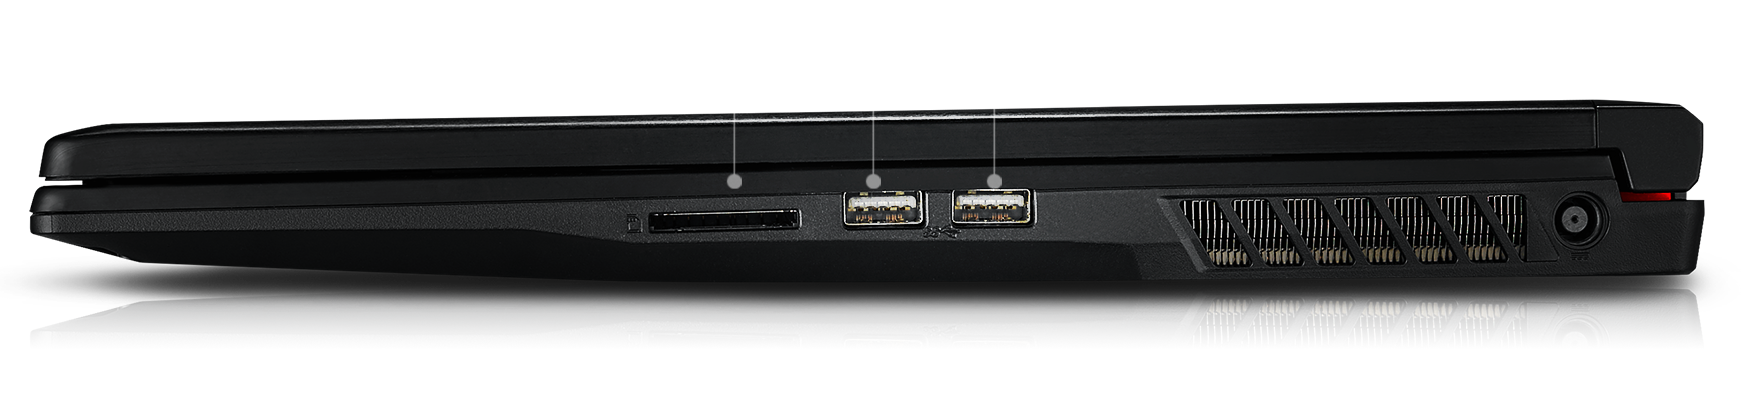 MSI Gaming Laptop Facing to the Side Showing Its SD (XC/HC) and two USB 3.1 ports